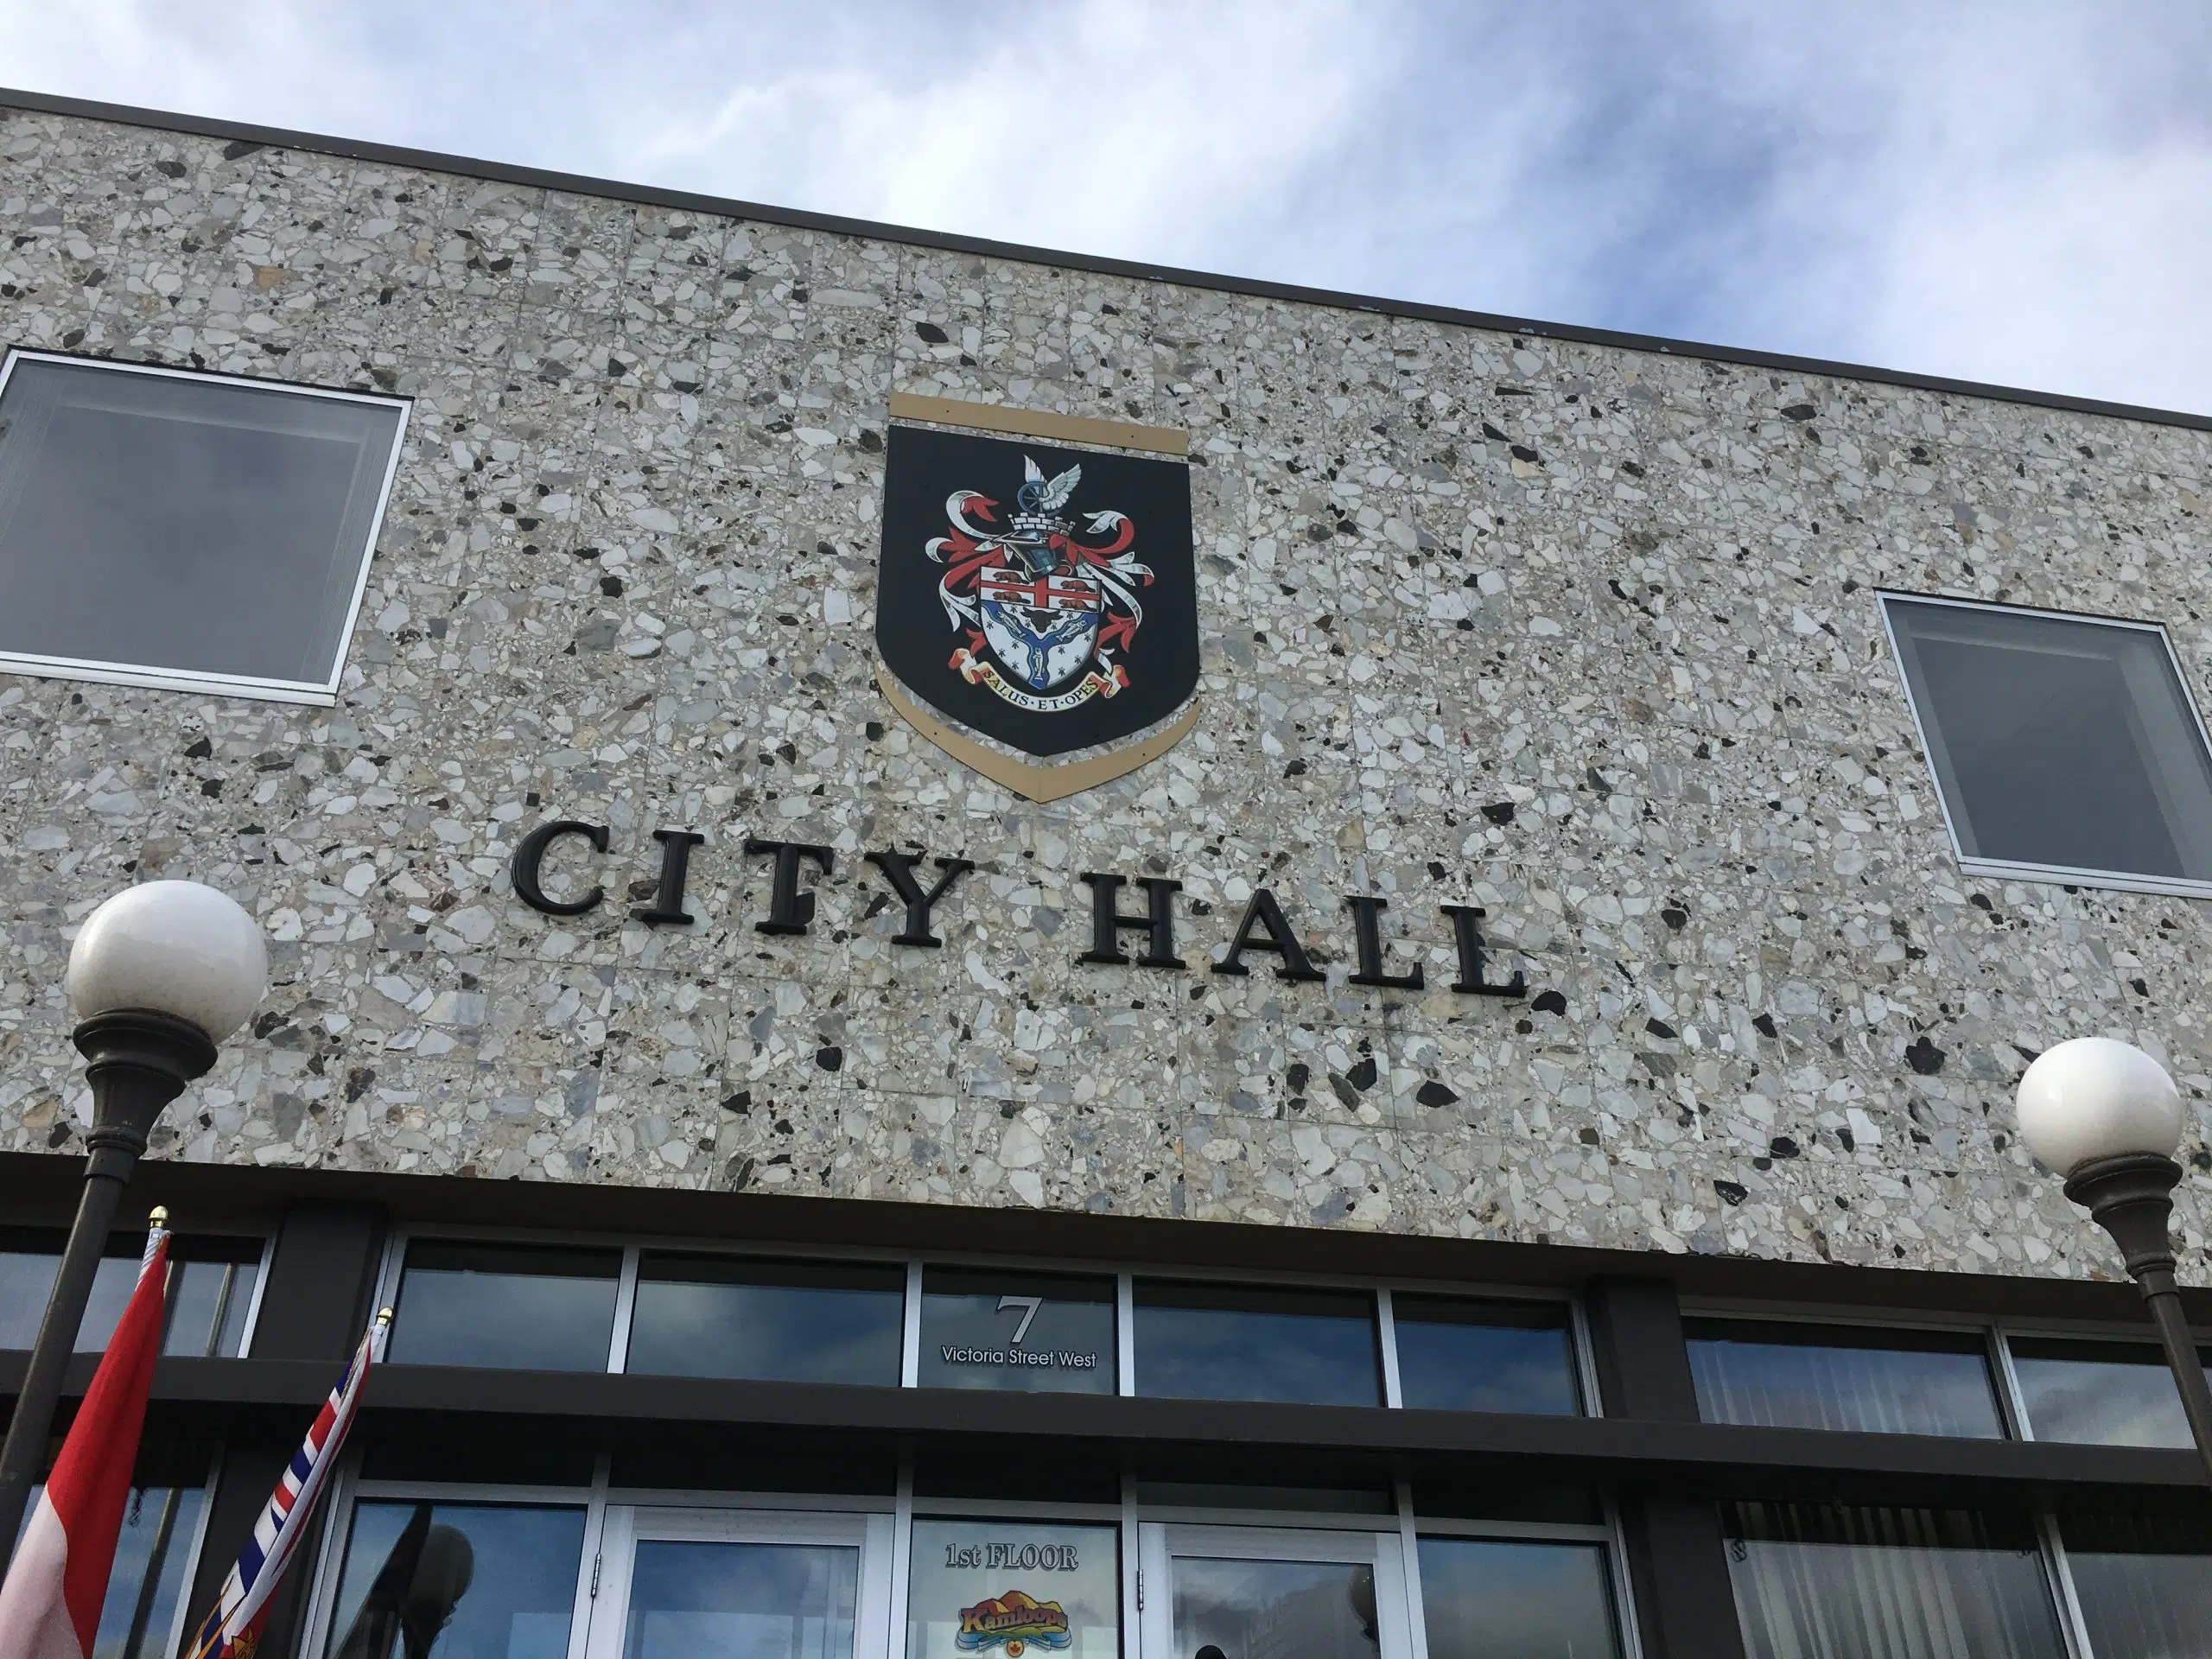 Kamloops council has turned down a motion to include the amount of the new health employer payroll tax on next year's property tax bill